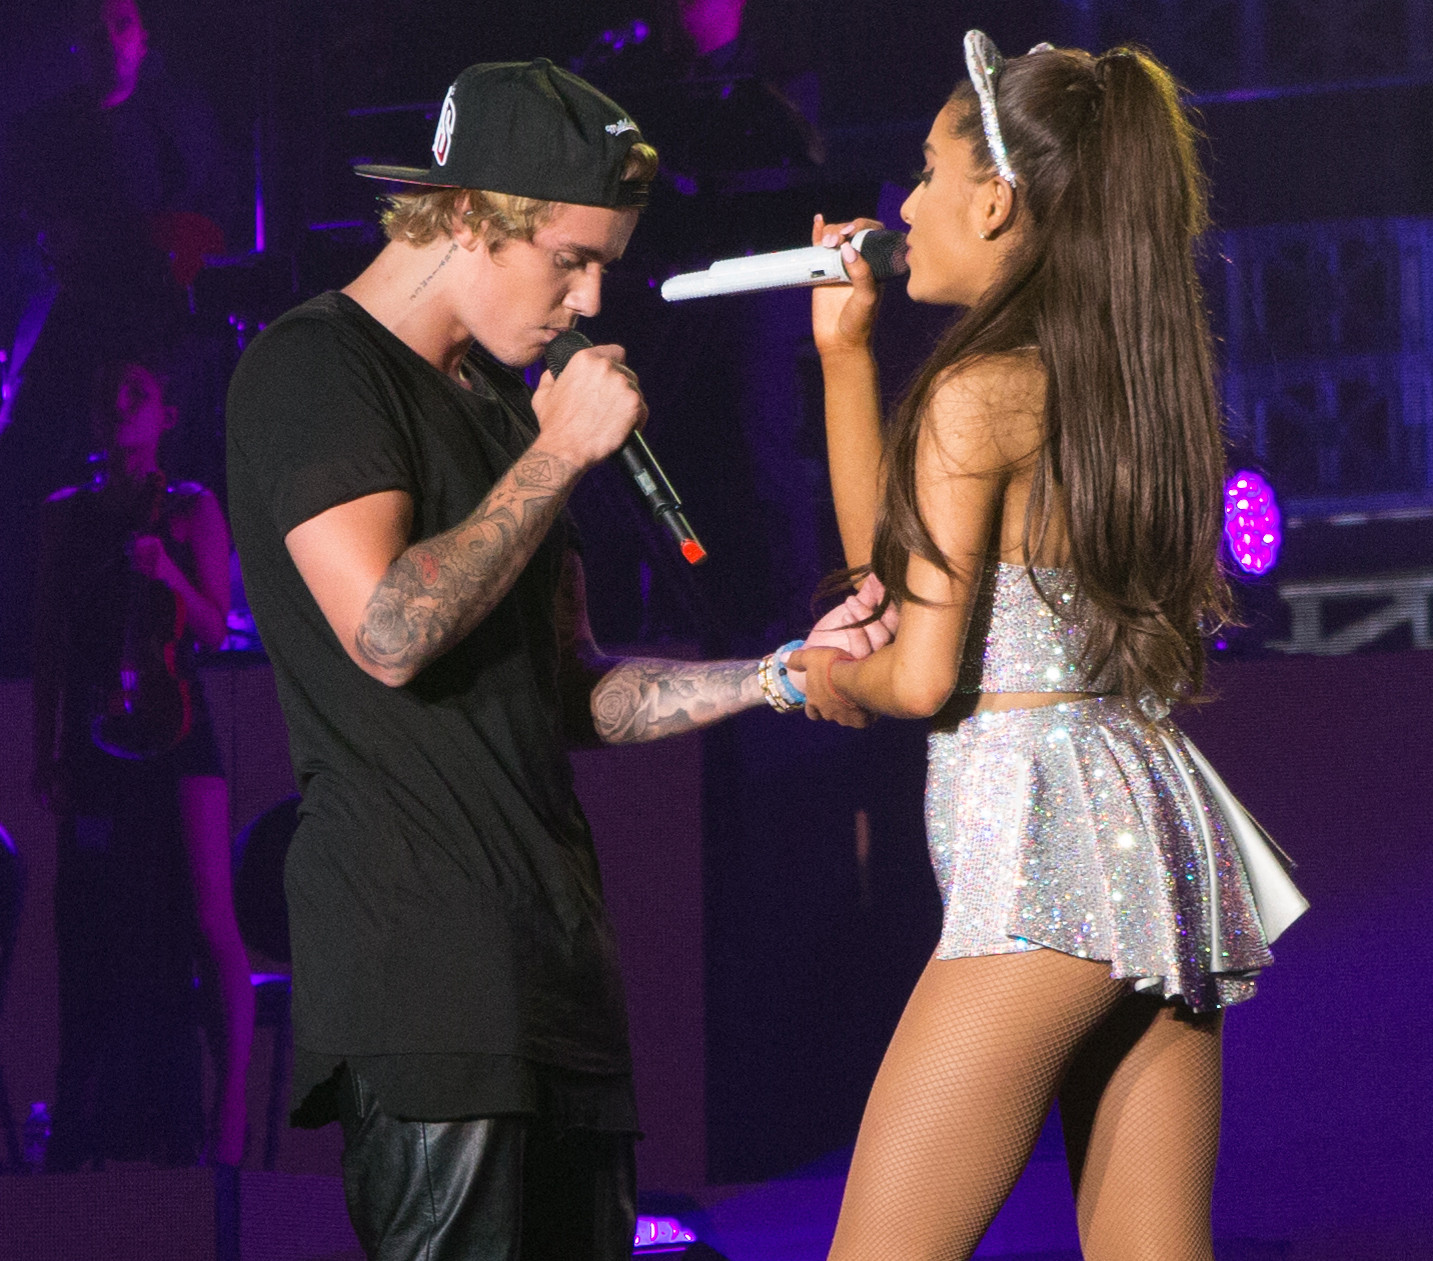 Justin Bieber and Ariana Grande show off their moves as they perform together during Ariana Grande's The Honeymoon Tour at the Forum in Inglewood, CAPictured: Ariana Grande, Justin BieberRef: SPL994687 080415 Picture by: Ronin 47/Splash NewsSplash News and PicturesLos Angeles: 310-821-2666New York: 212-619-2666London: 870-934-2666photodesk@splashnews.com